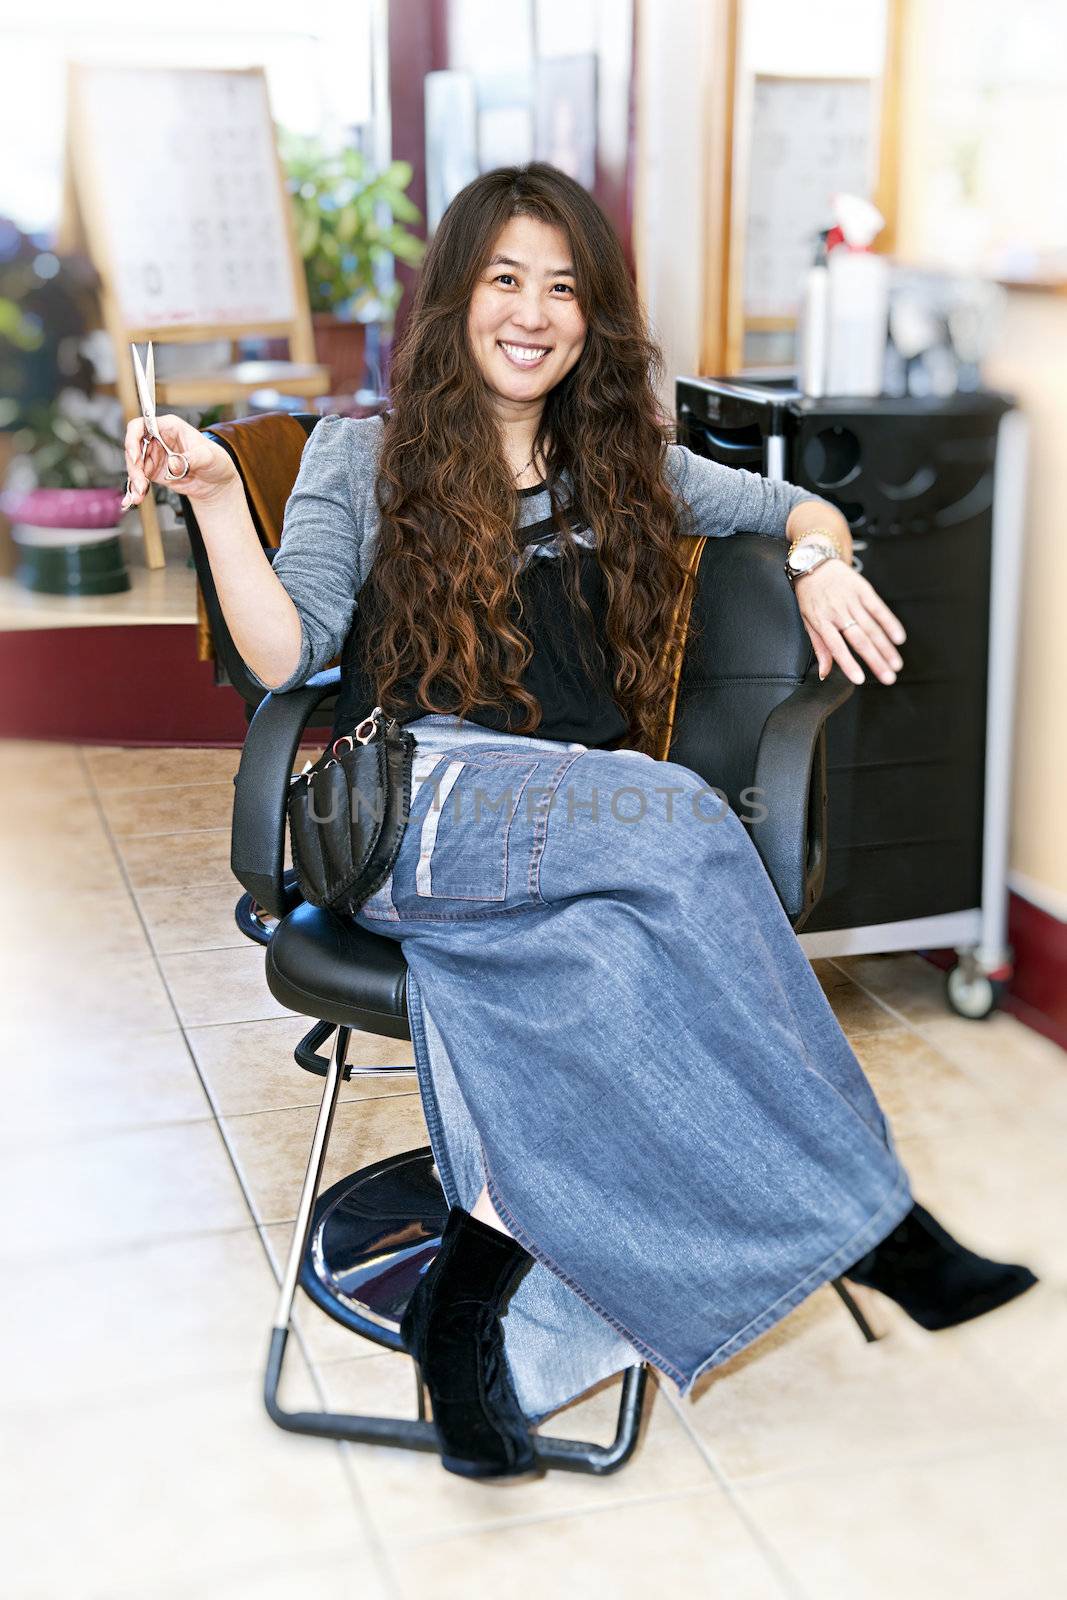 Hairstylist sitting in a chair in her hair salon